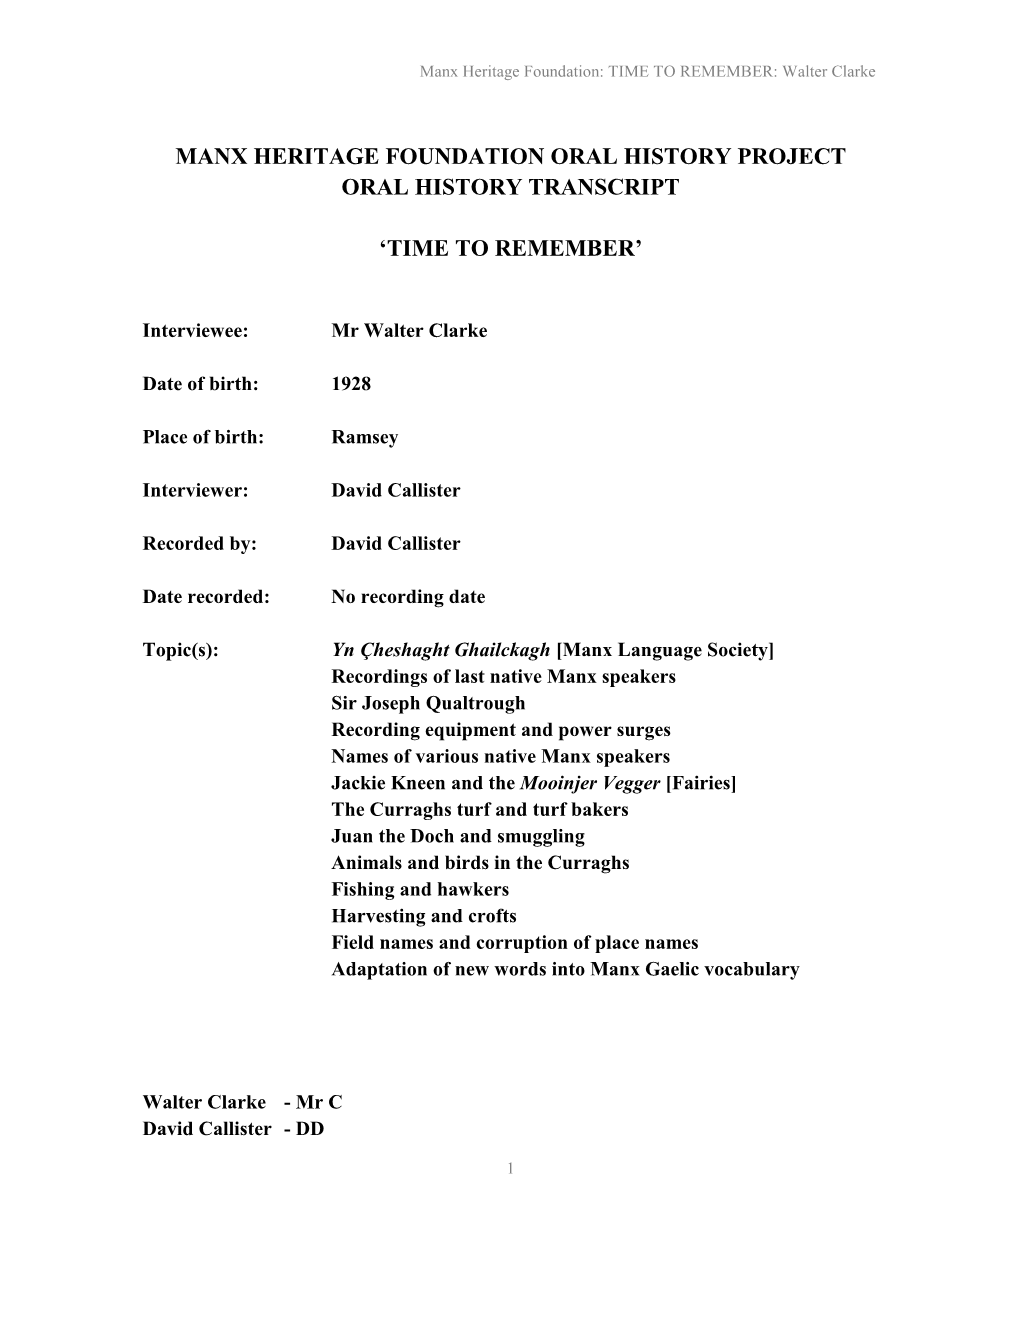 Manx Heritage Foundation Oral History Project Oral History Transcript